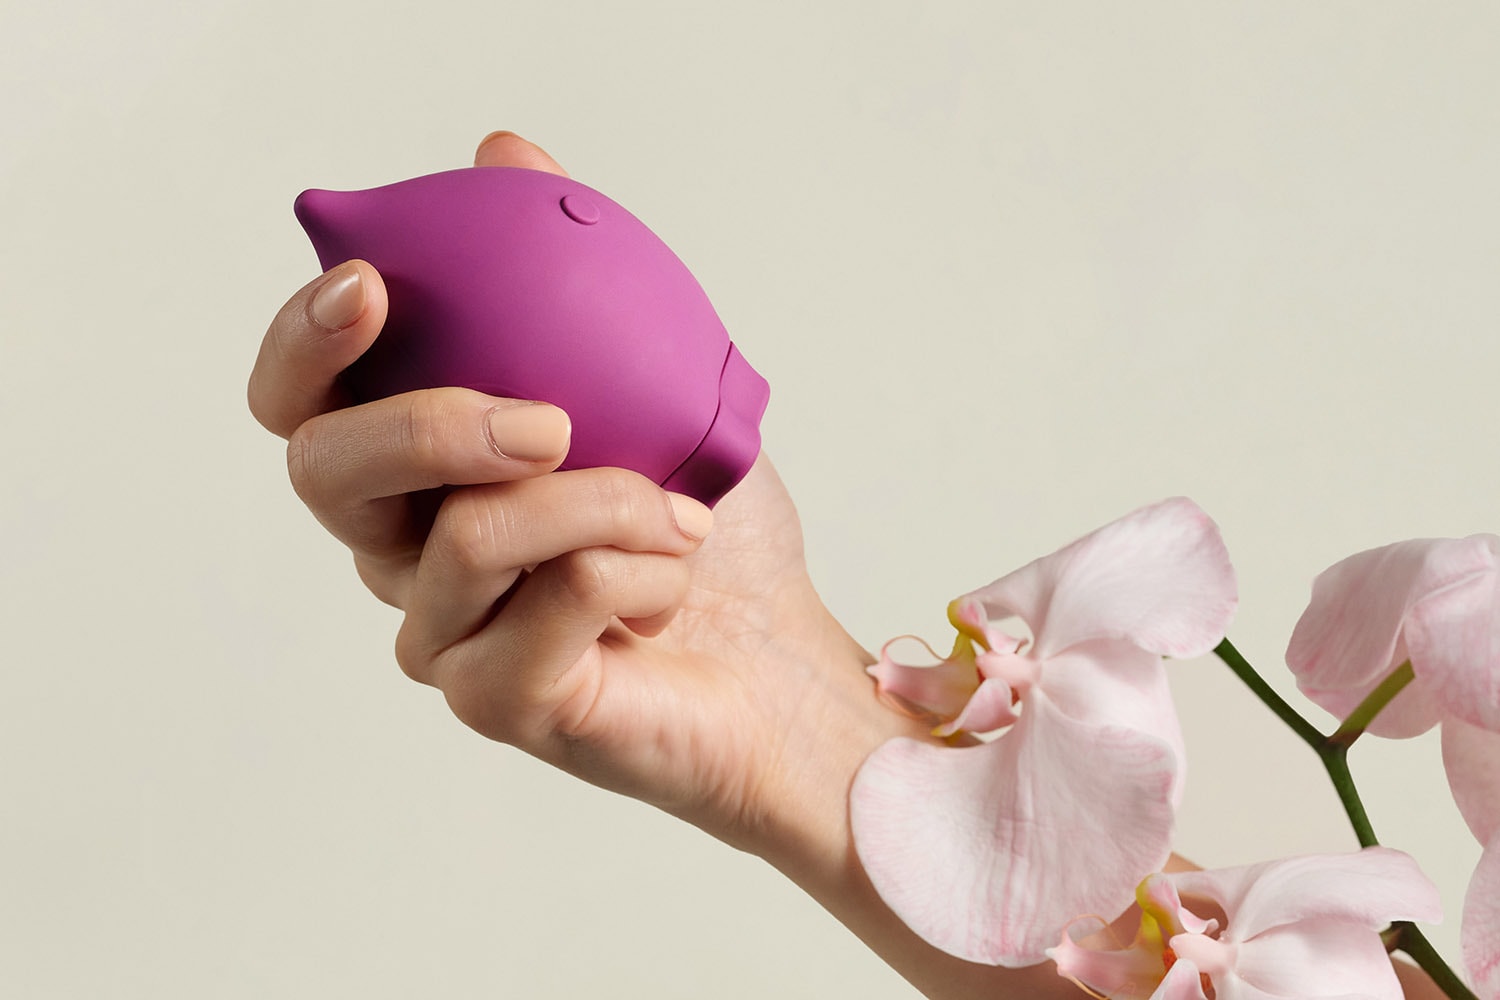 Smile Makers' The Poet Air Pulse Suction Vibrator Clitoral Stimulation